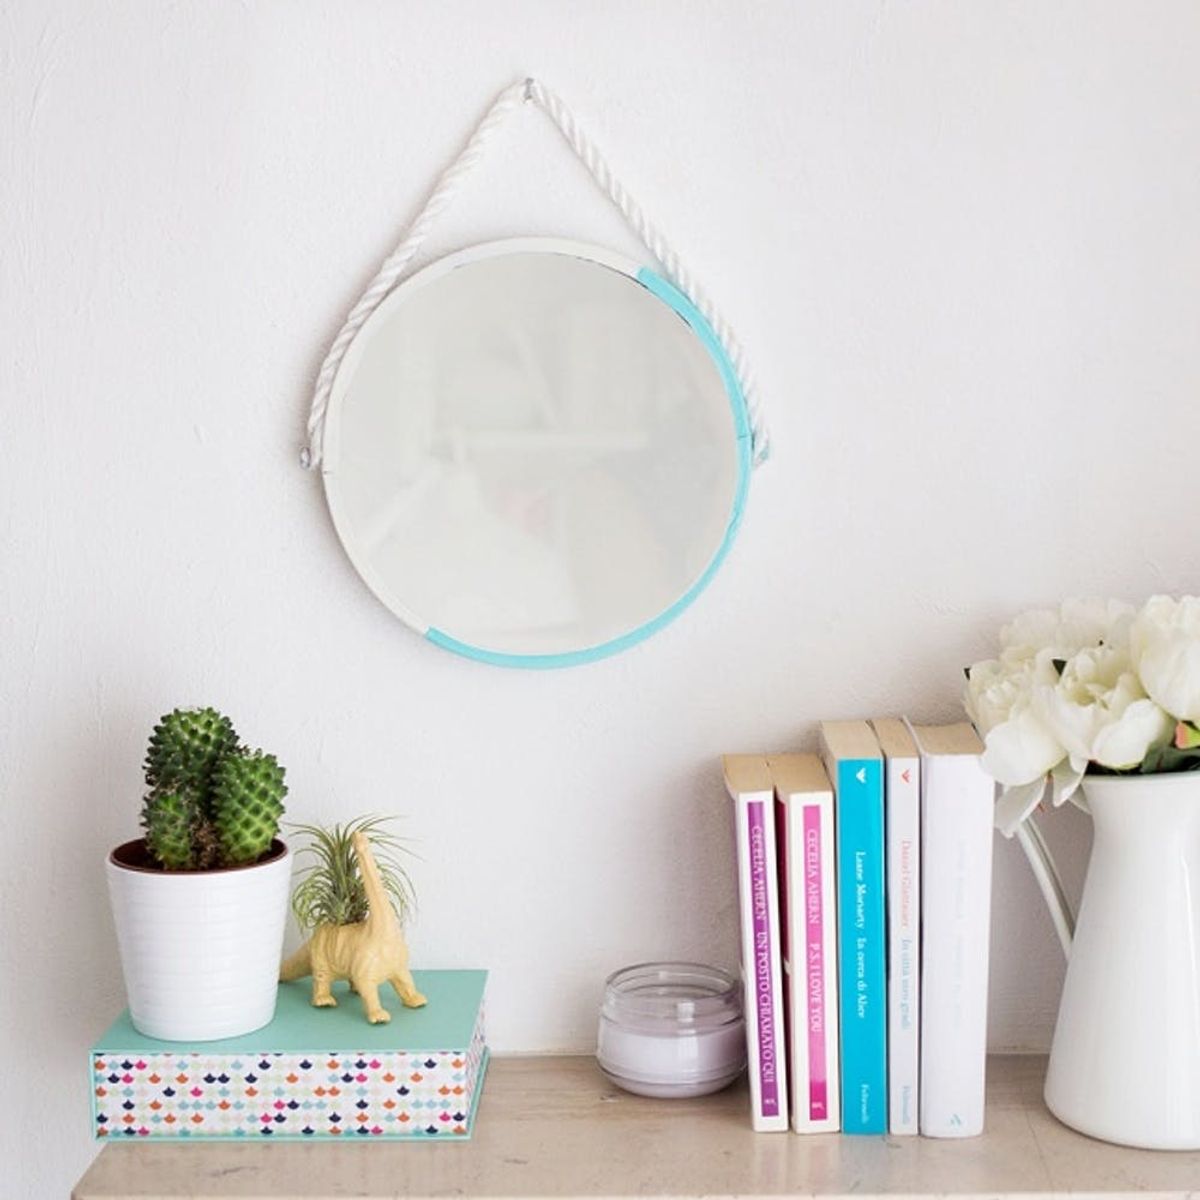 How to Make This Nautical-Inspired Rope Mirror